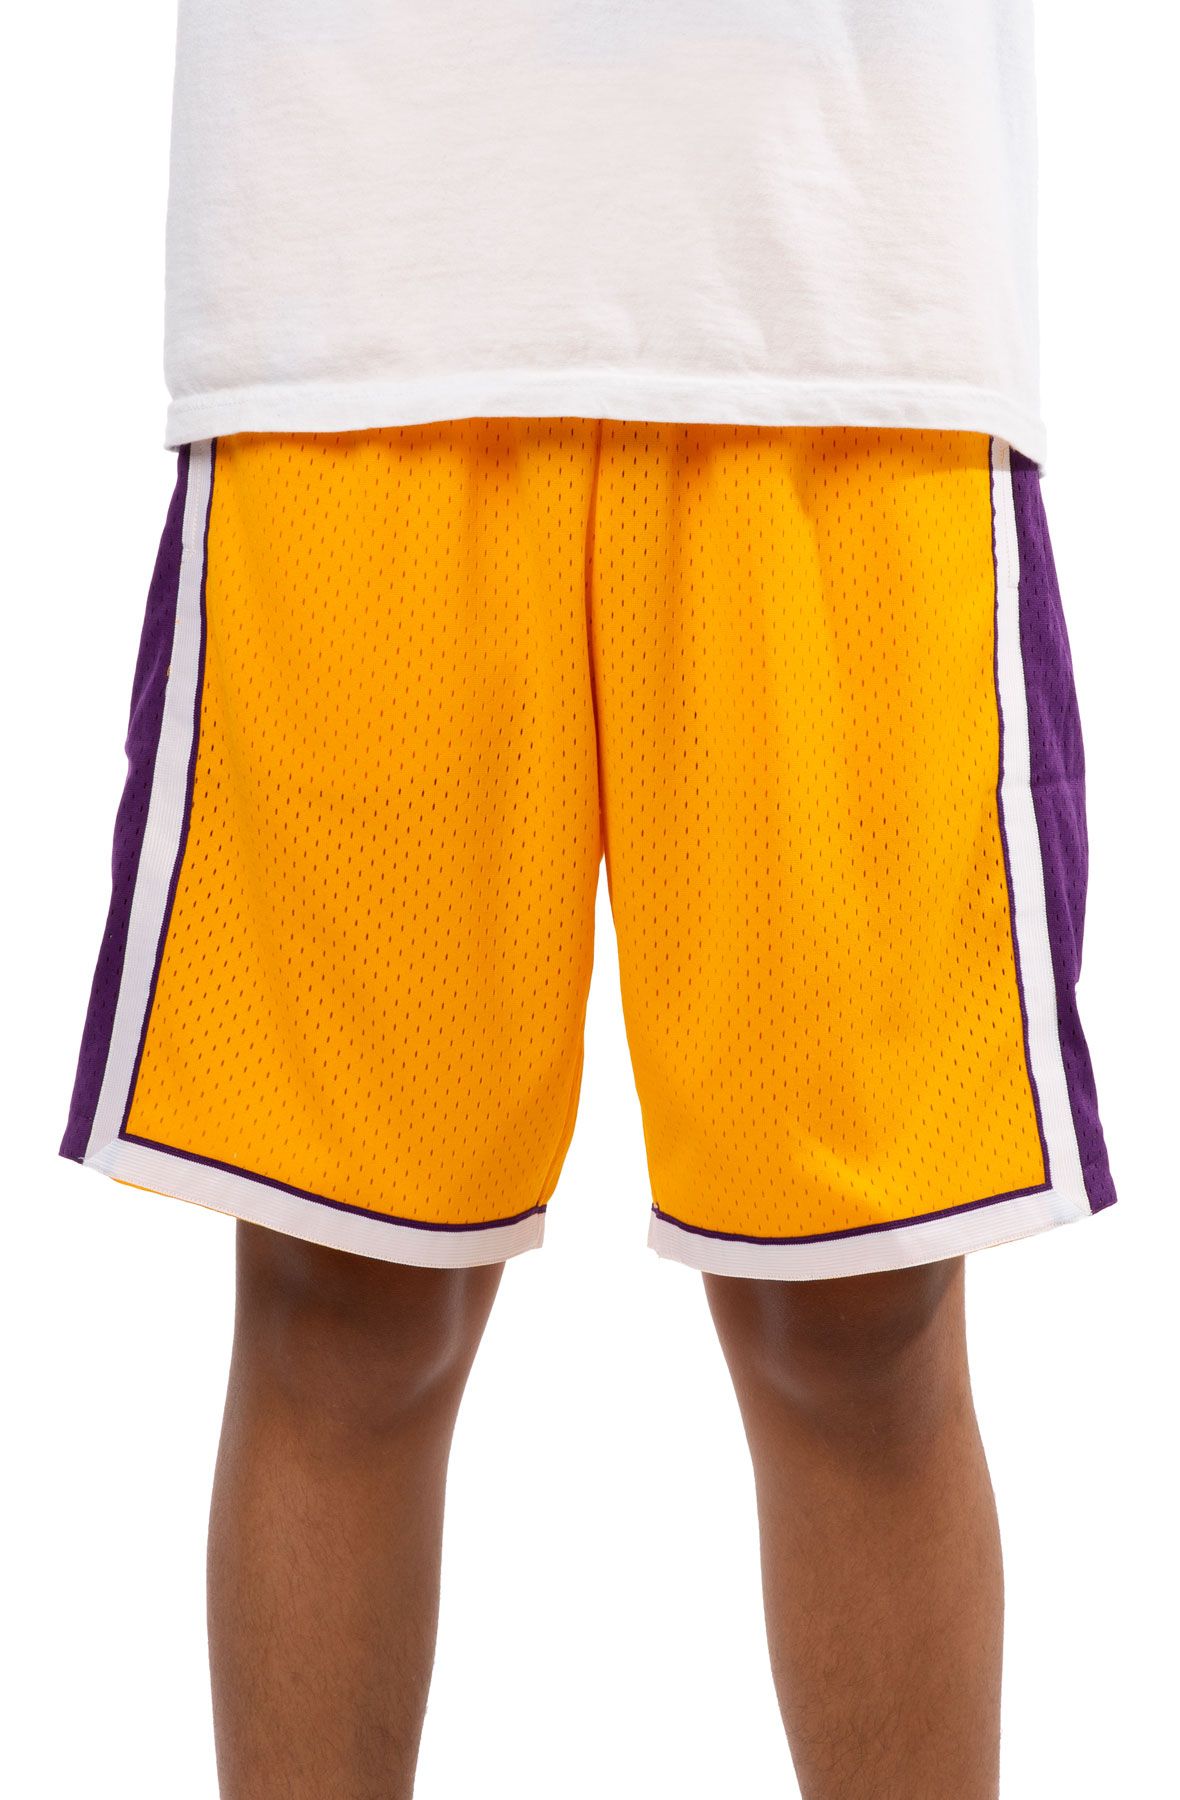 MITCHELL AND NESS Los Angeles Lakers 2009-10 Swingman Shorts  SMSHCP19075-LALLGPR09 - Shiekh